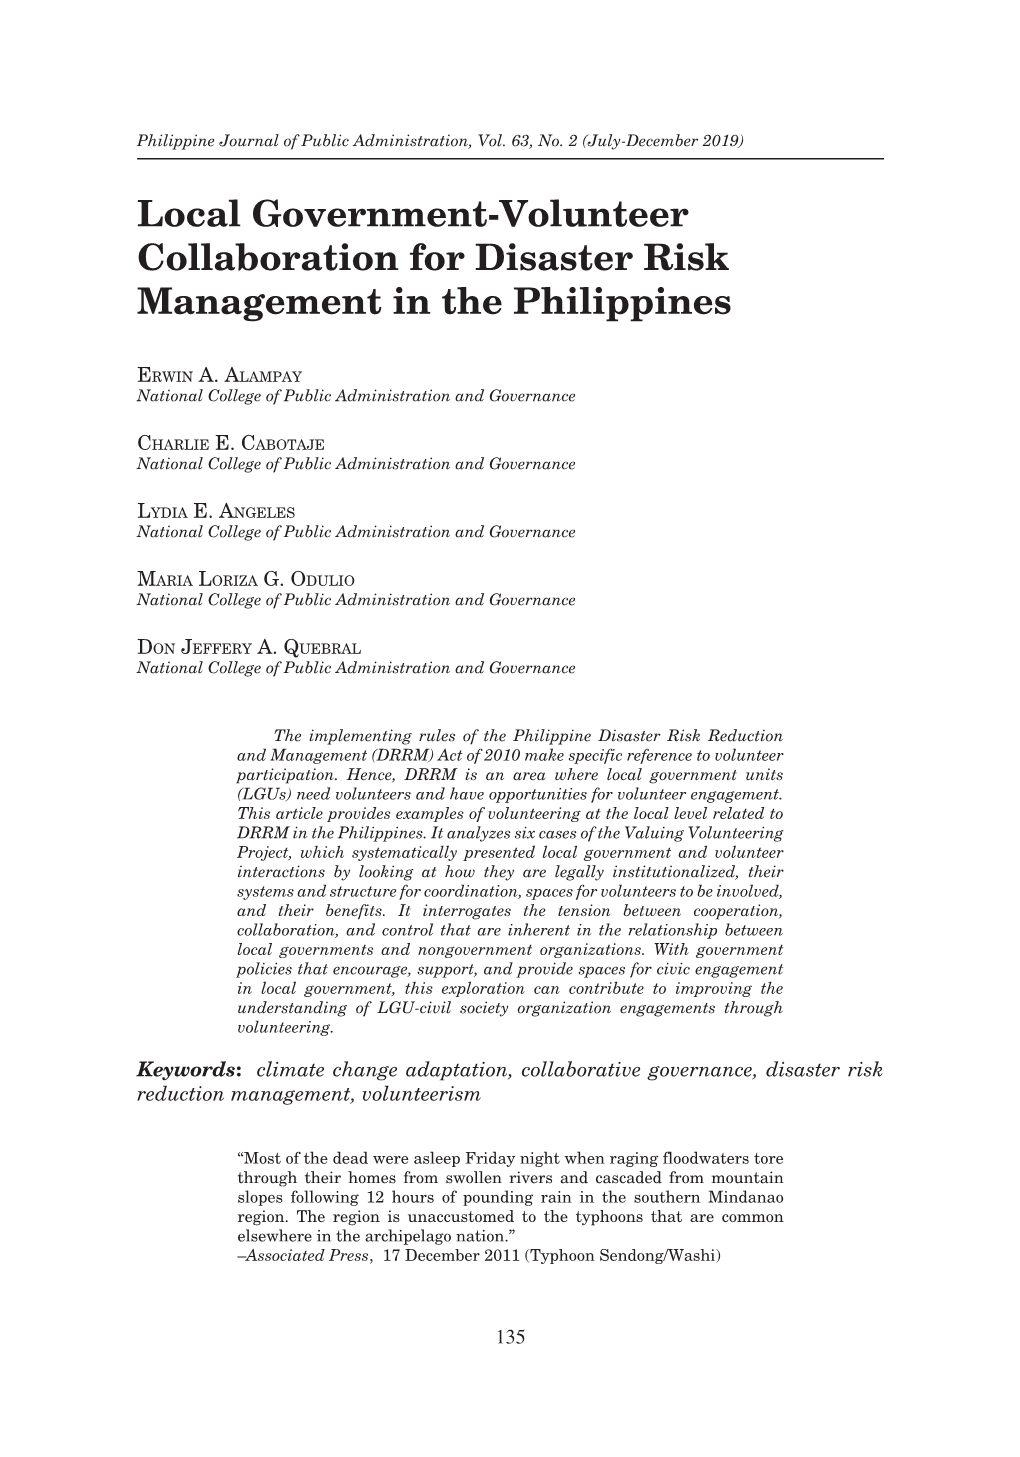 Local Government-Volunteer Collaboration for Disaster Risk Management in the Philippines